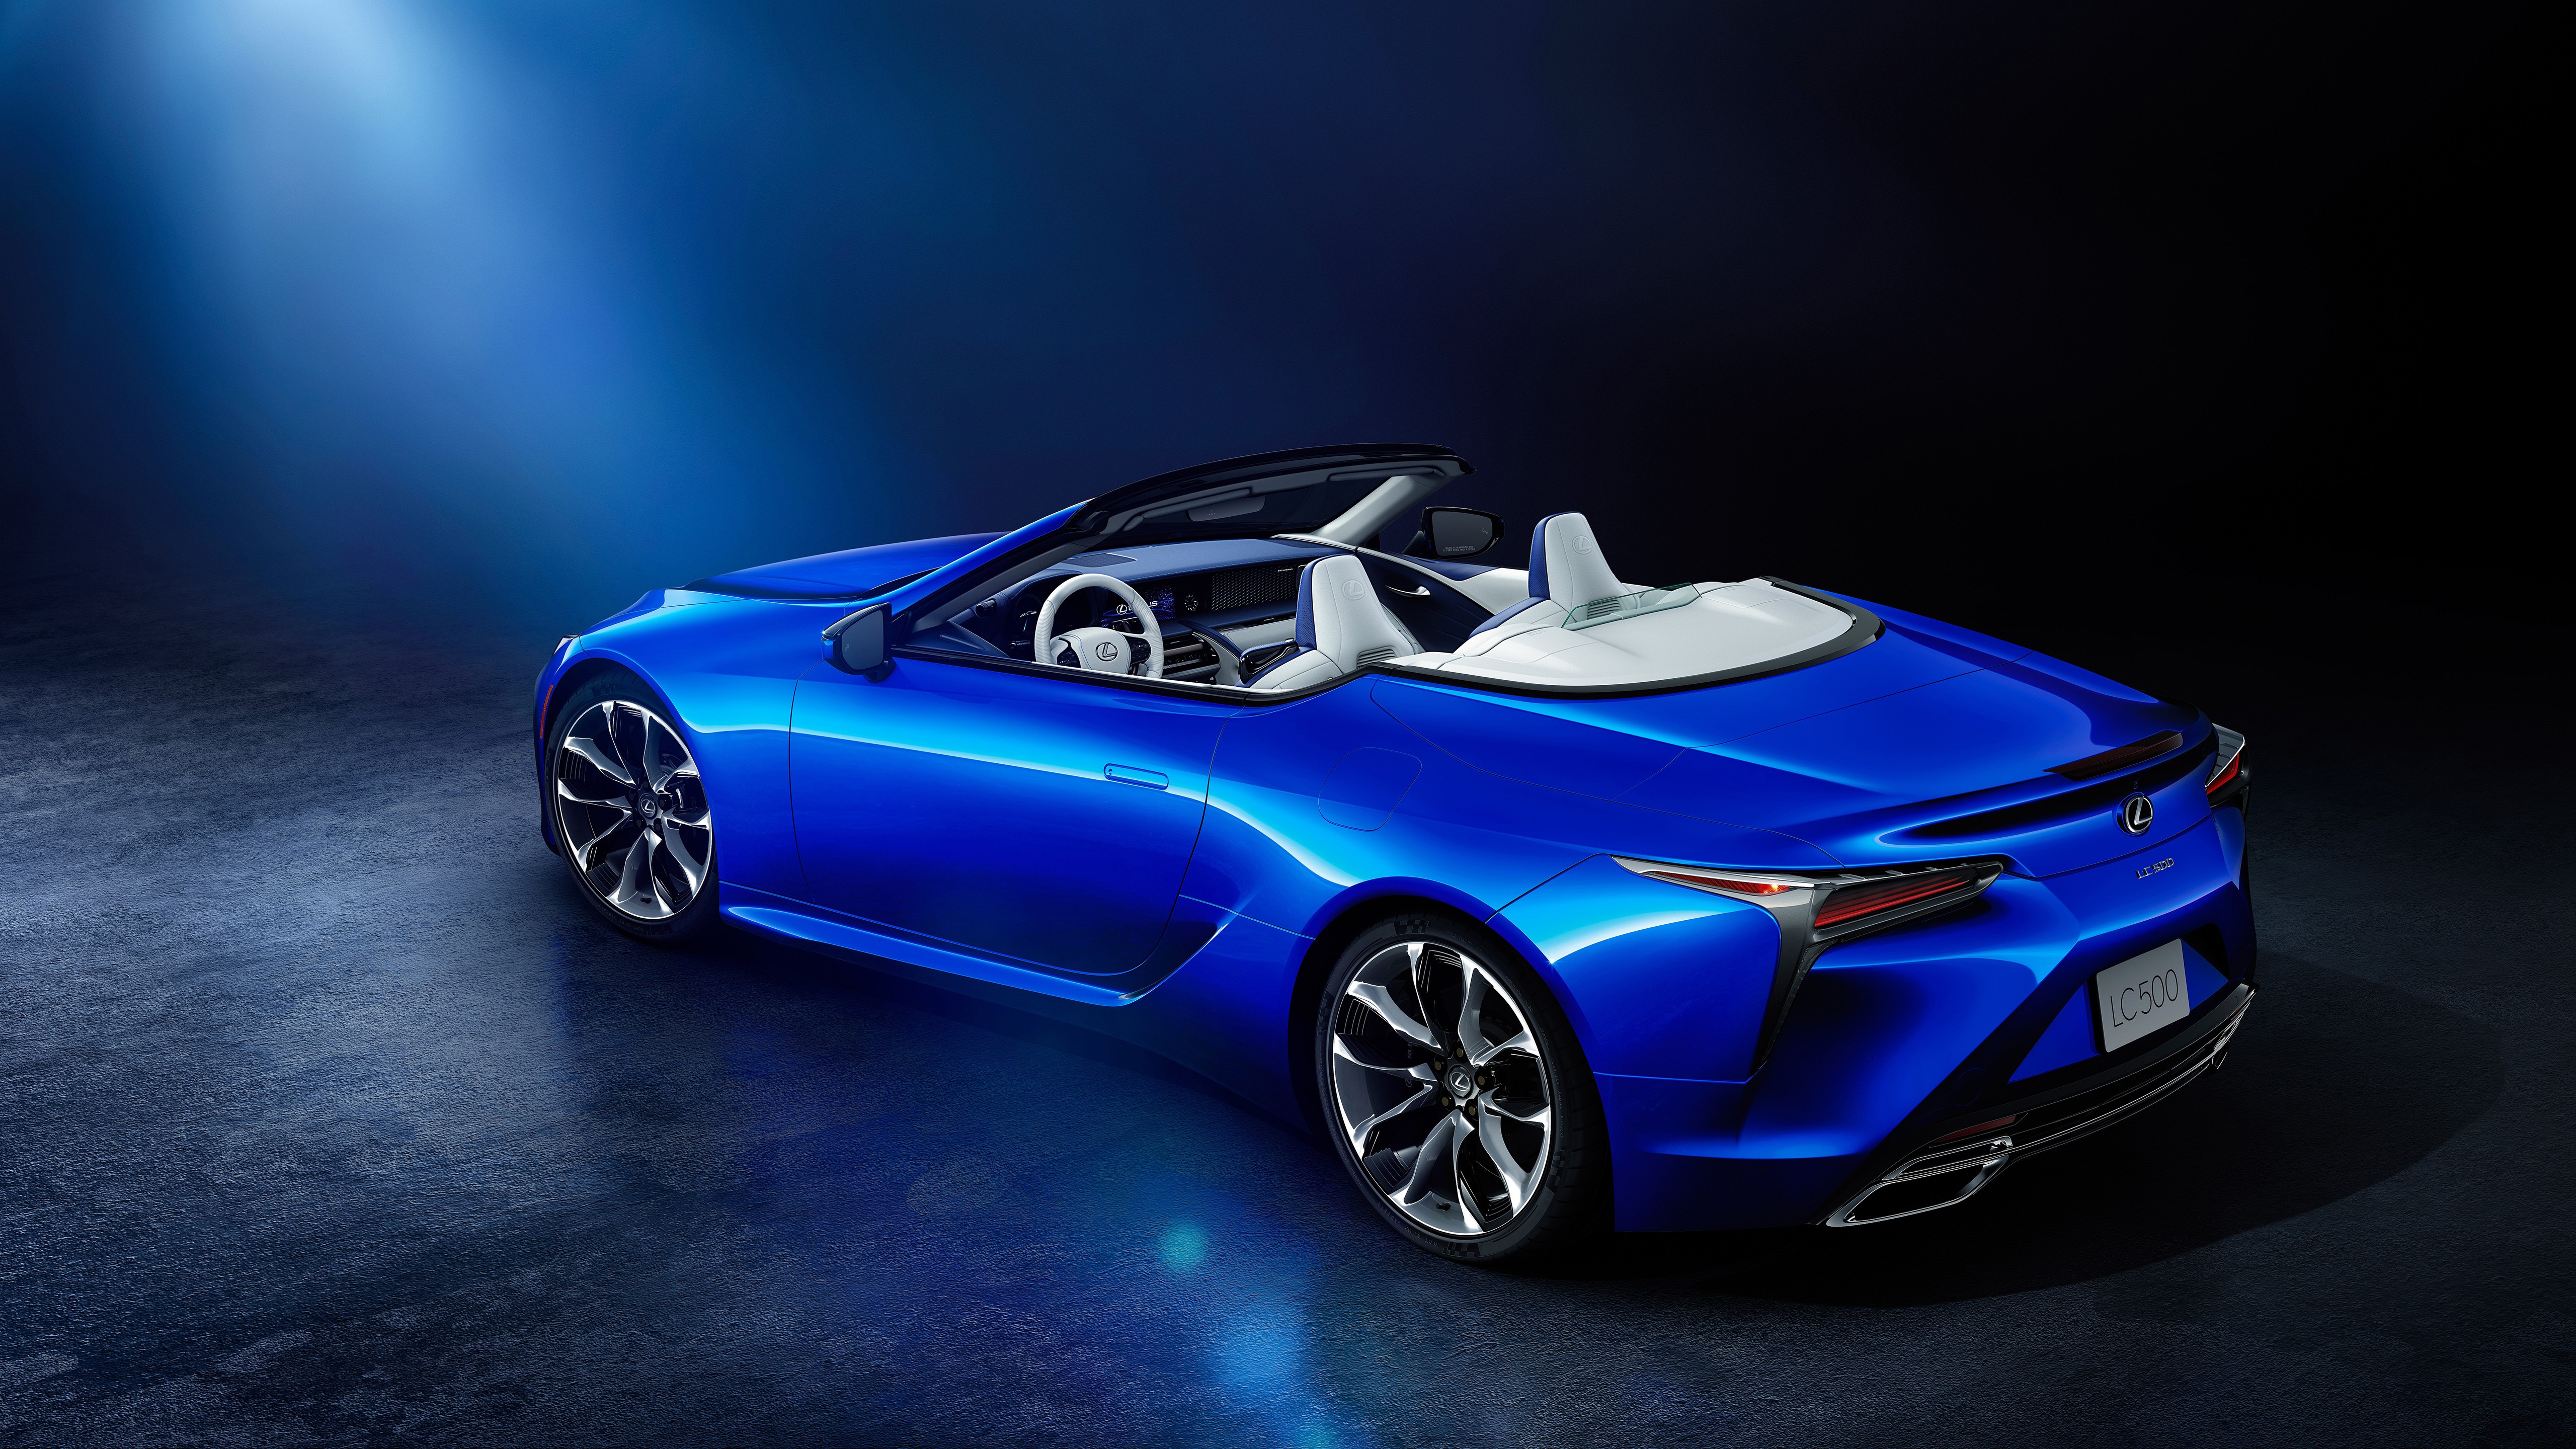 Wallpapers blue luxury cars Lexus Lc 500 Convertible on the desktop